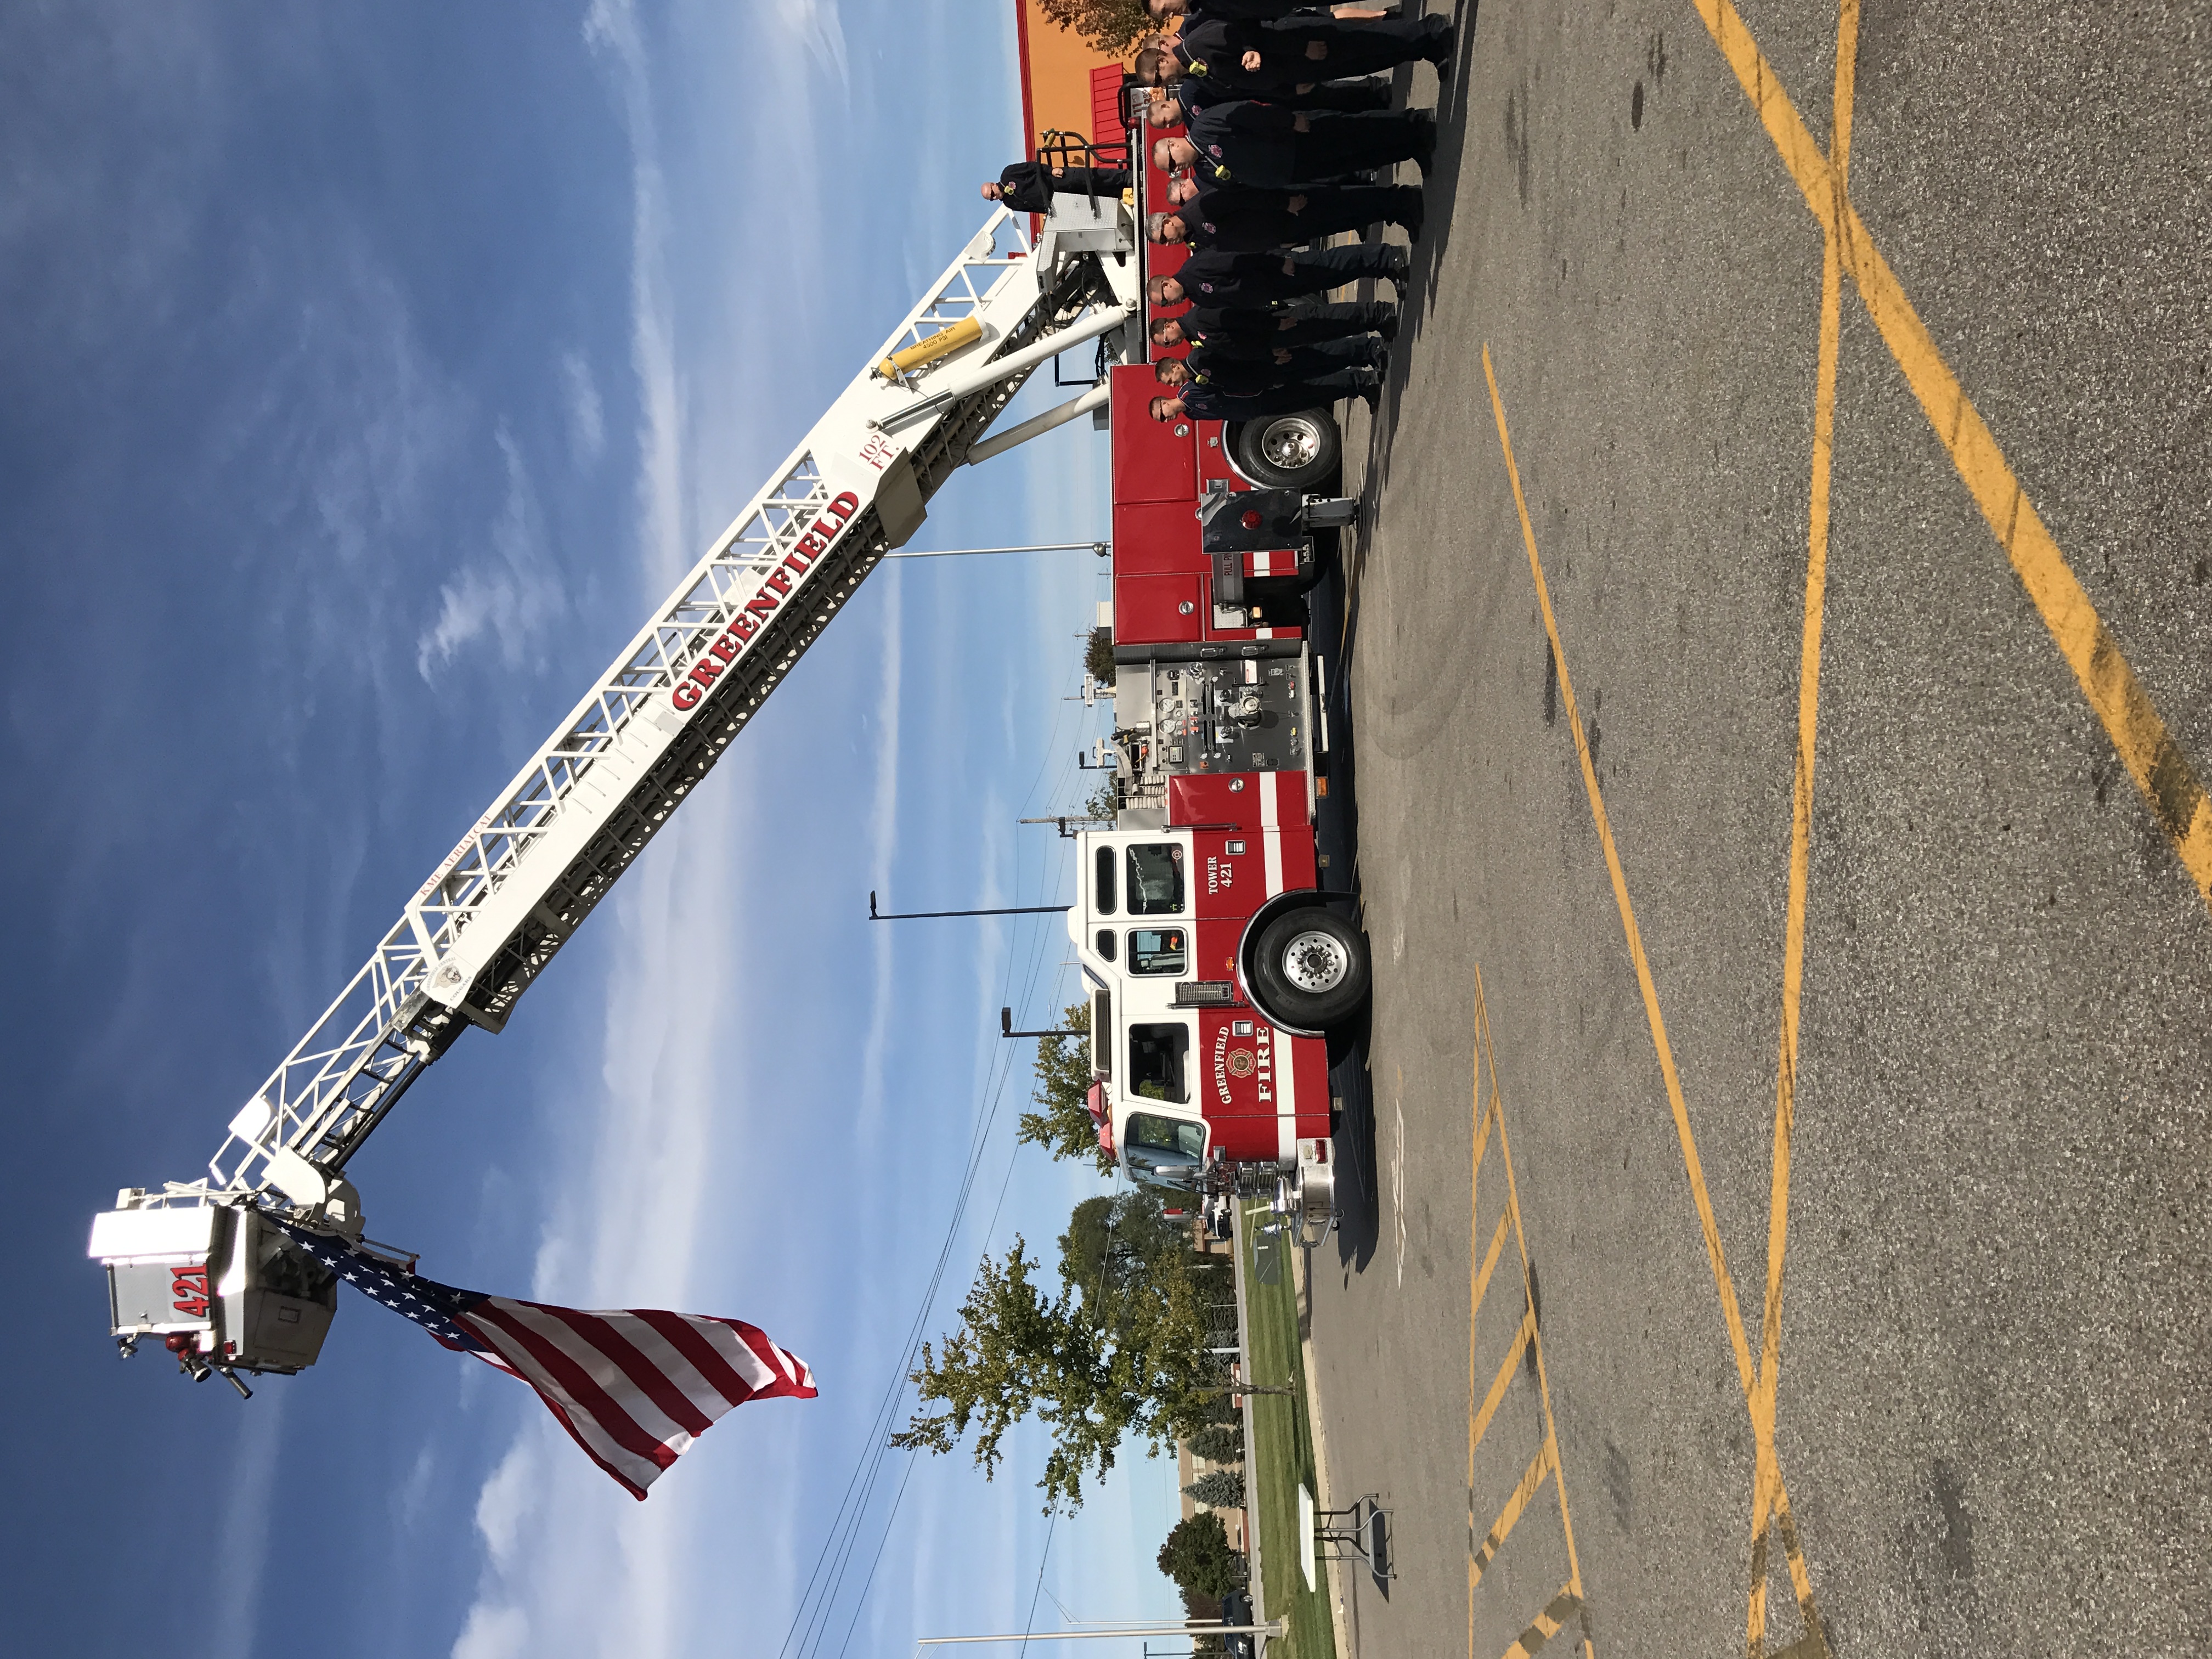 Red firetruck, the arm is lifted, and there’s a flag hanging from the arm of the lift